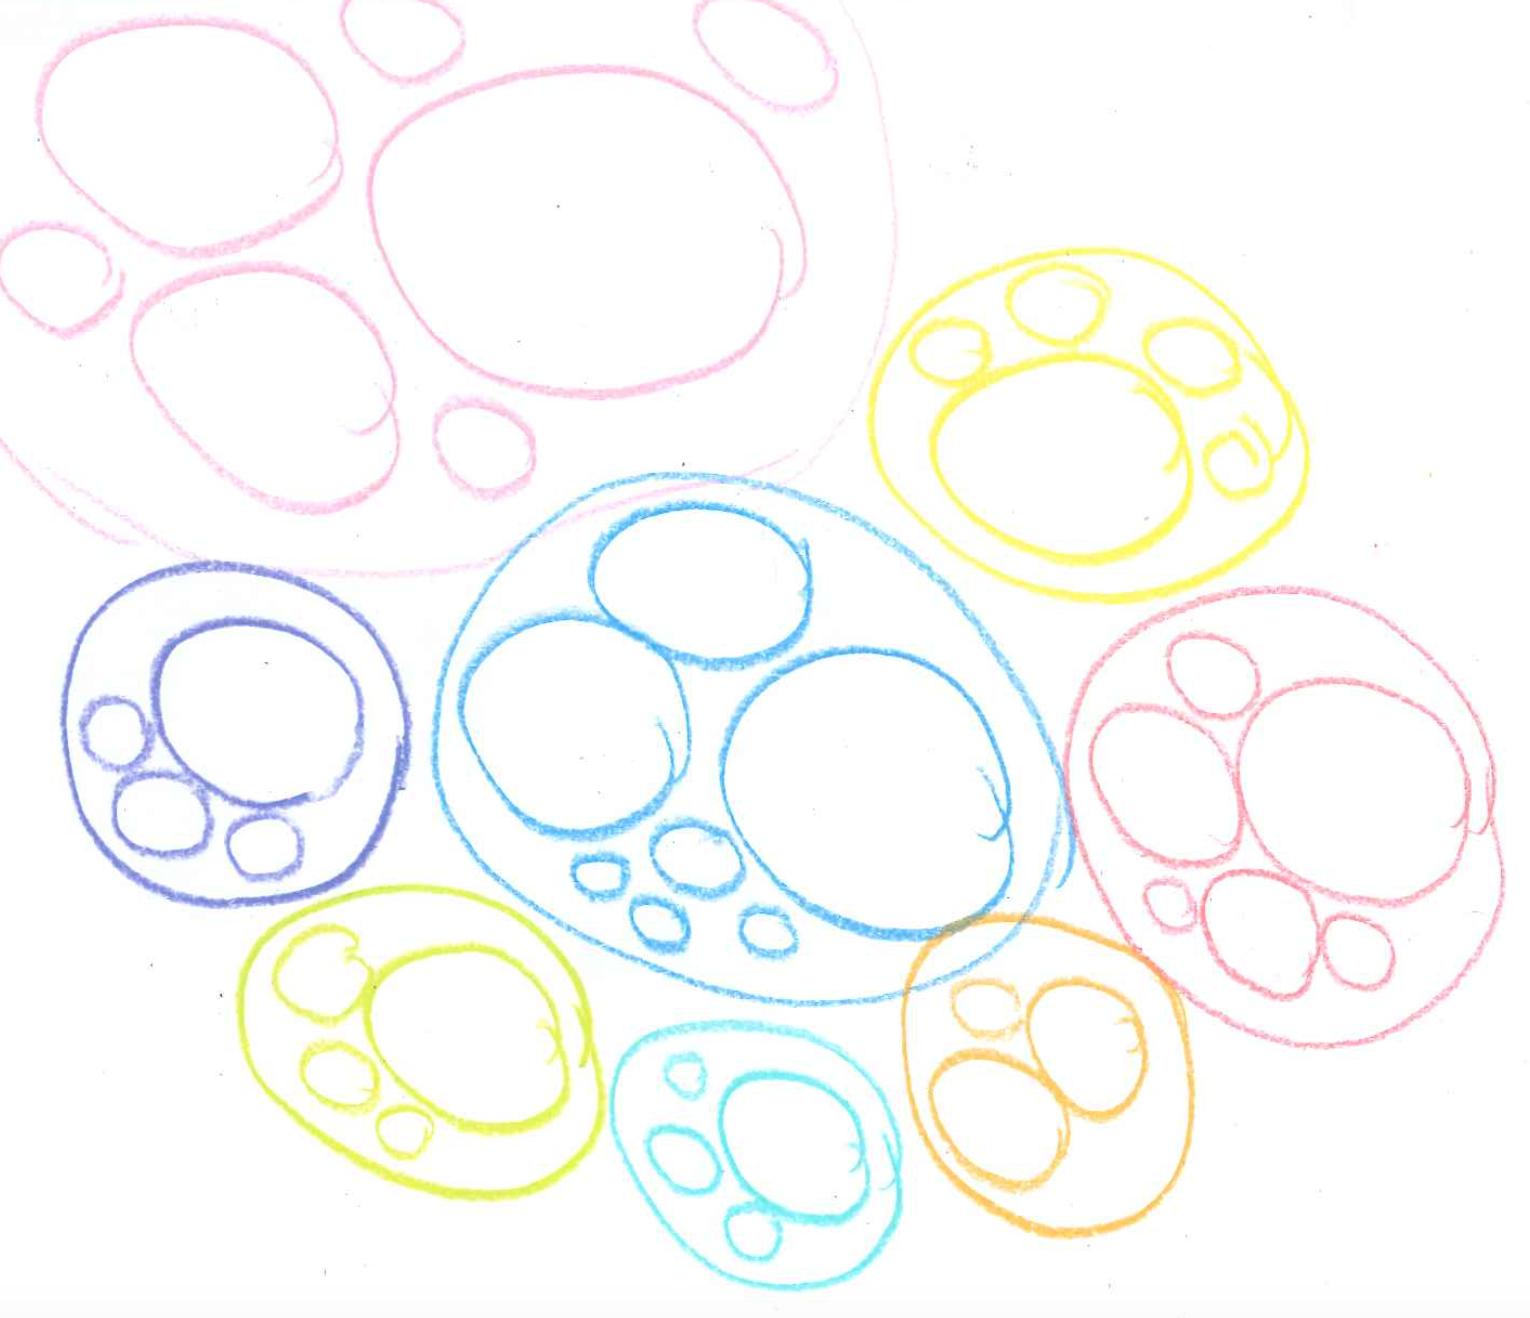 sketch of packed circles diagram